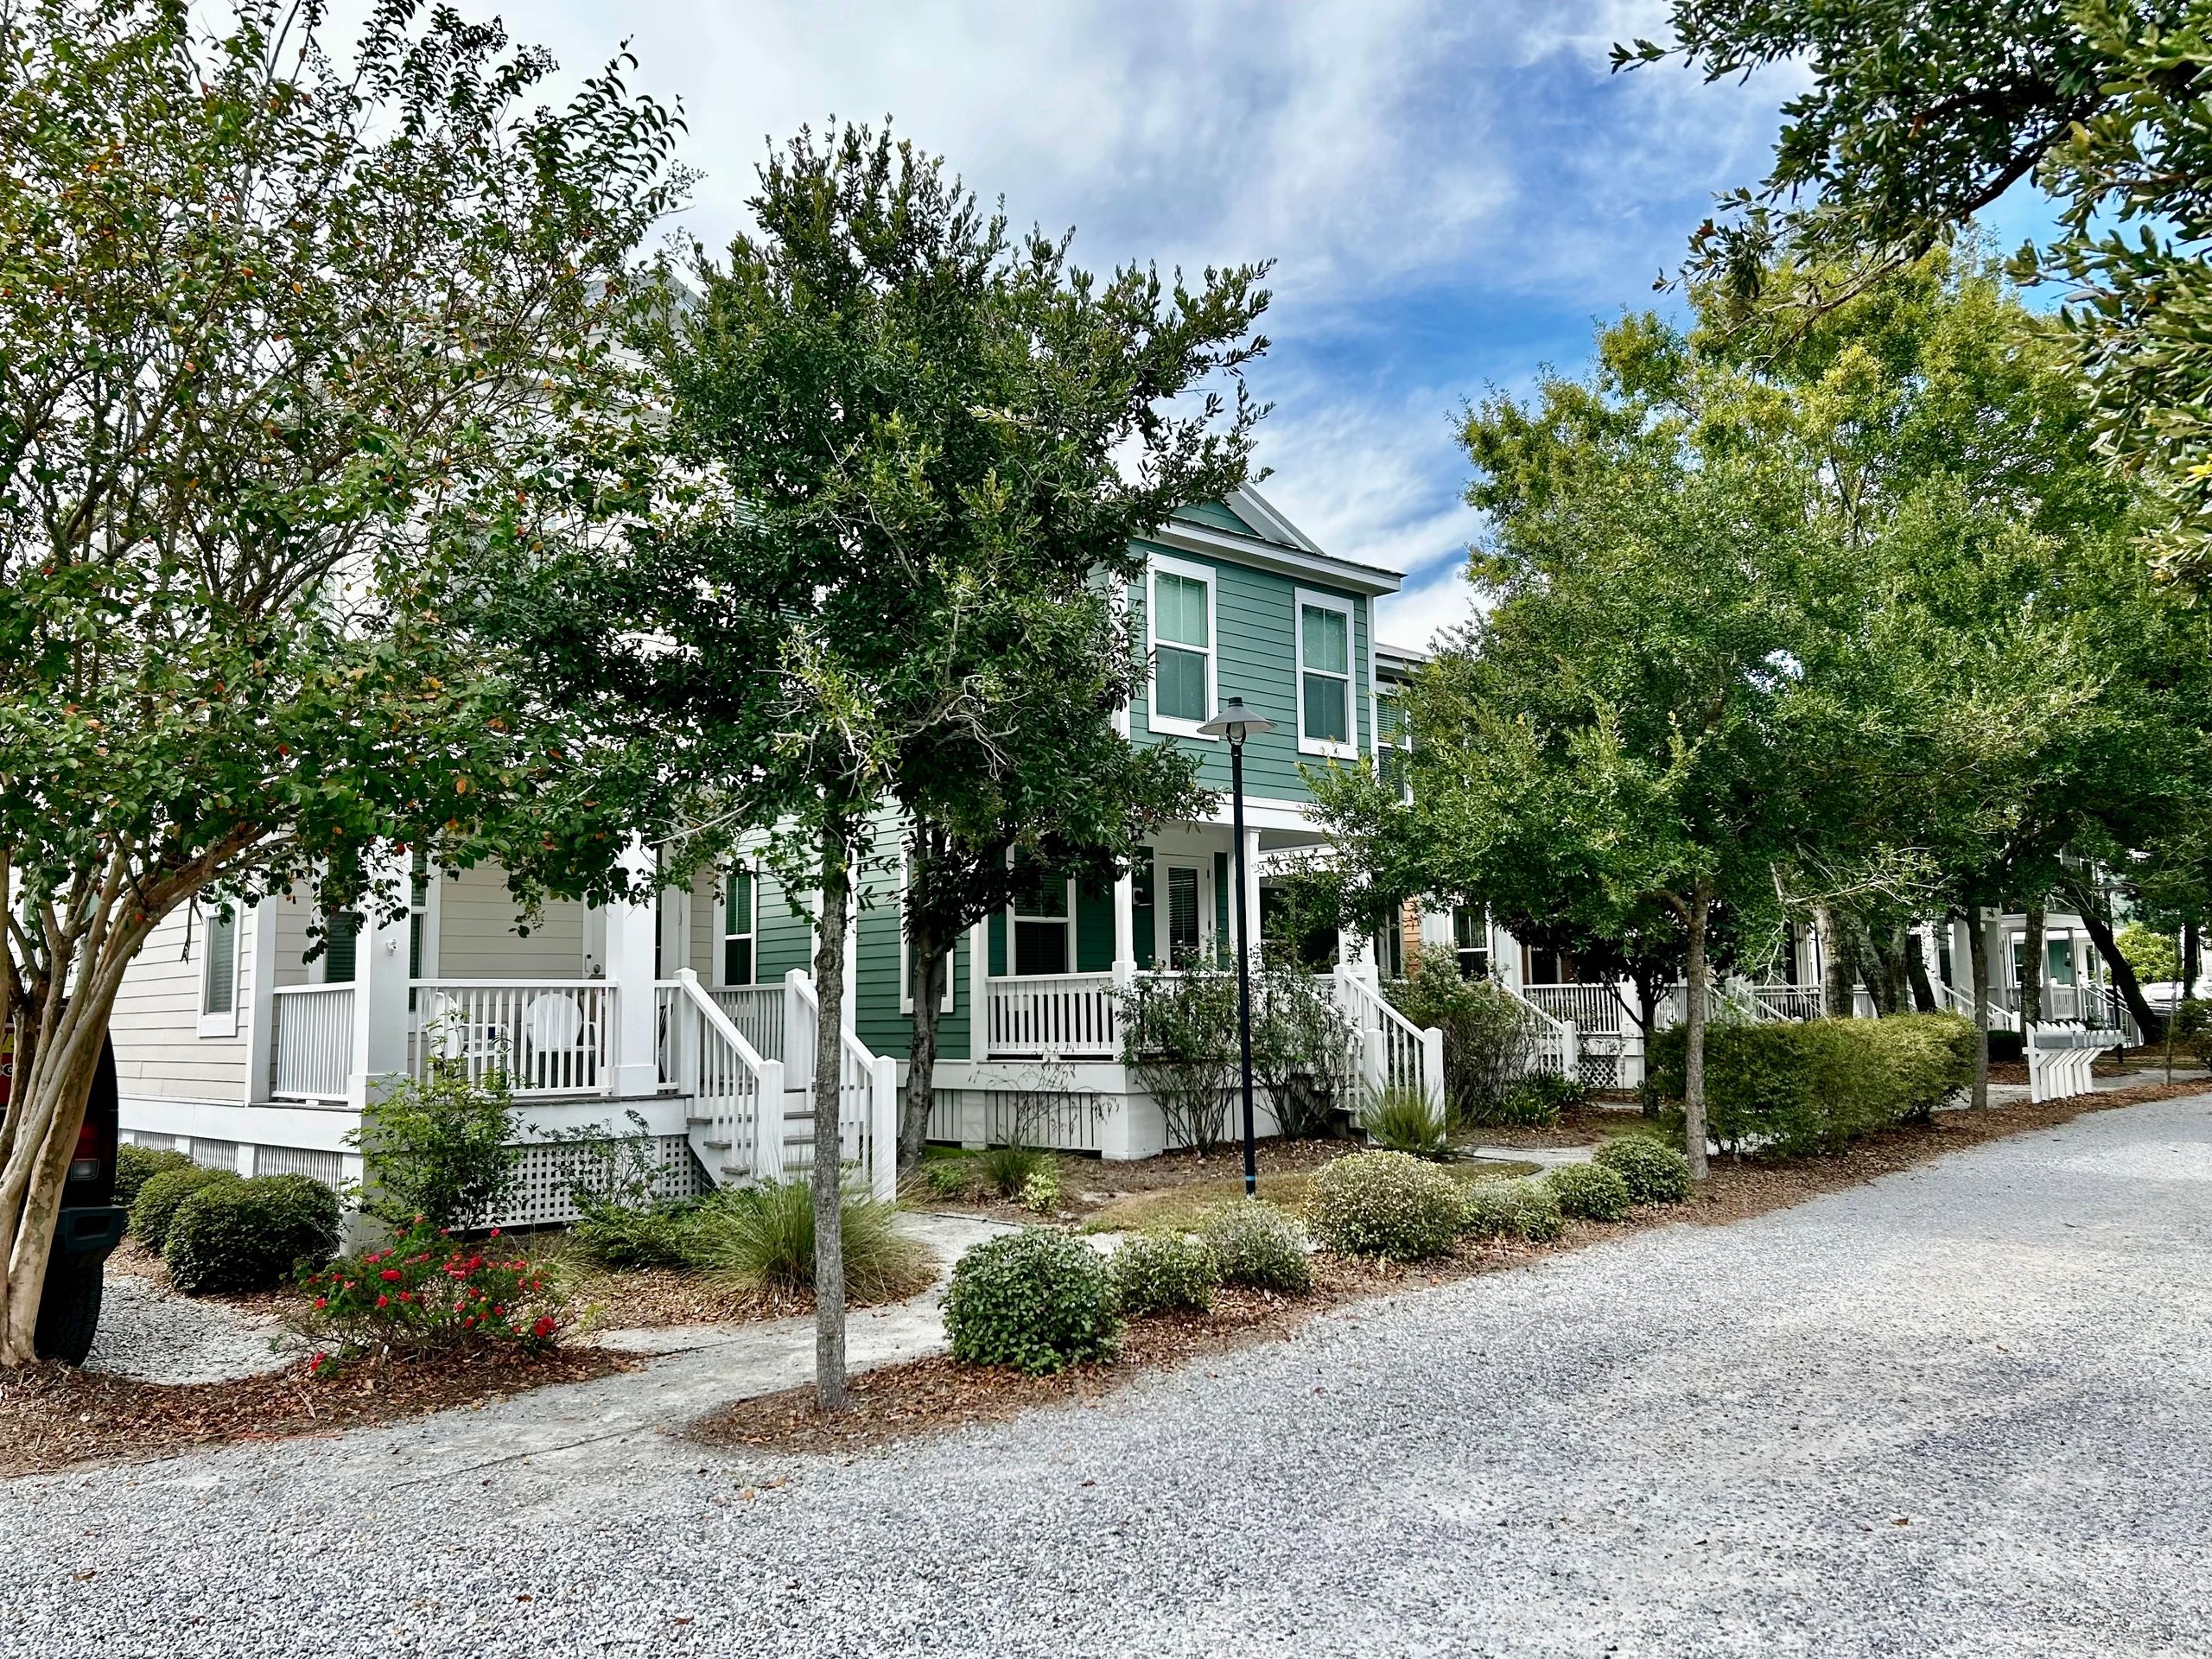 # are you ready
# vacation rental cottage in ocean springs